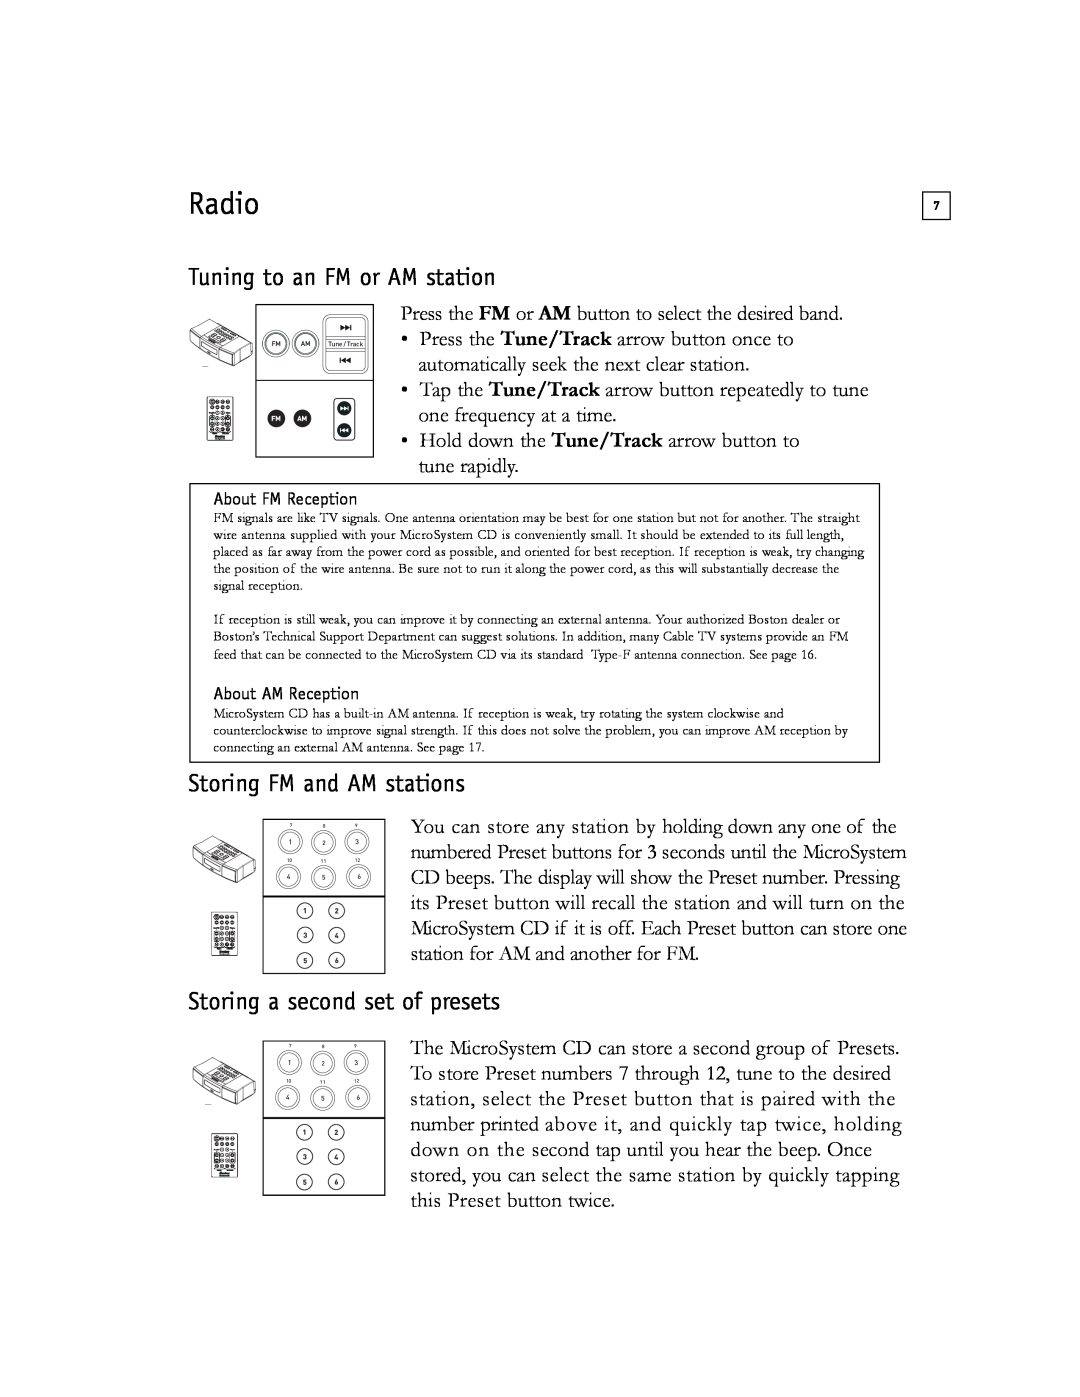 Boston Acoustics Shelf Stereo System owner manual Radio, Tuning to an FM or AM station, Storing FM and AM stations 